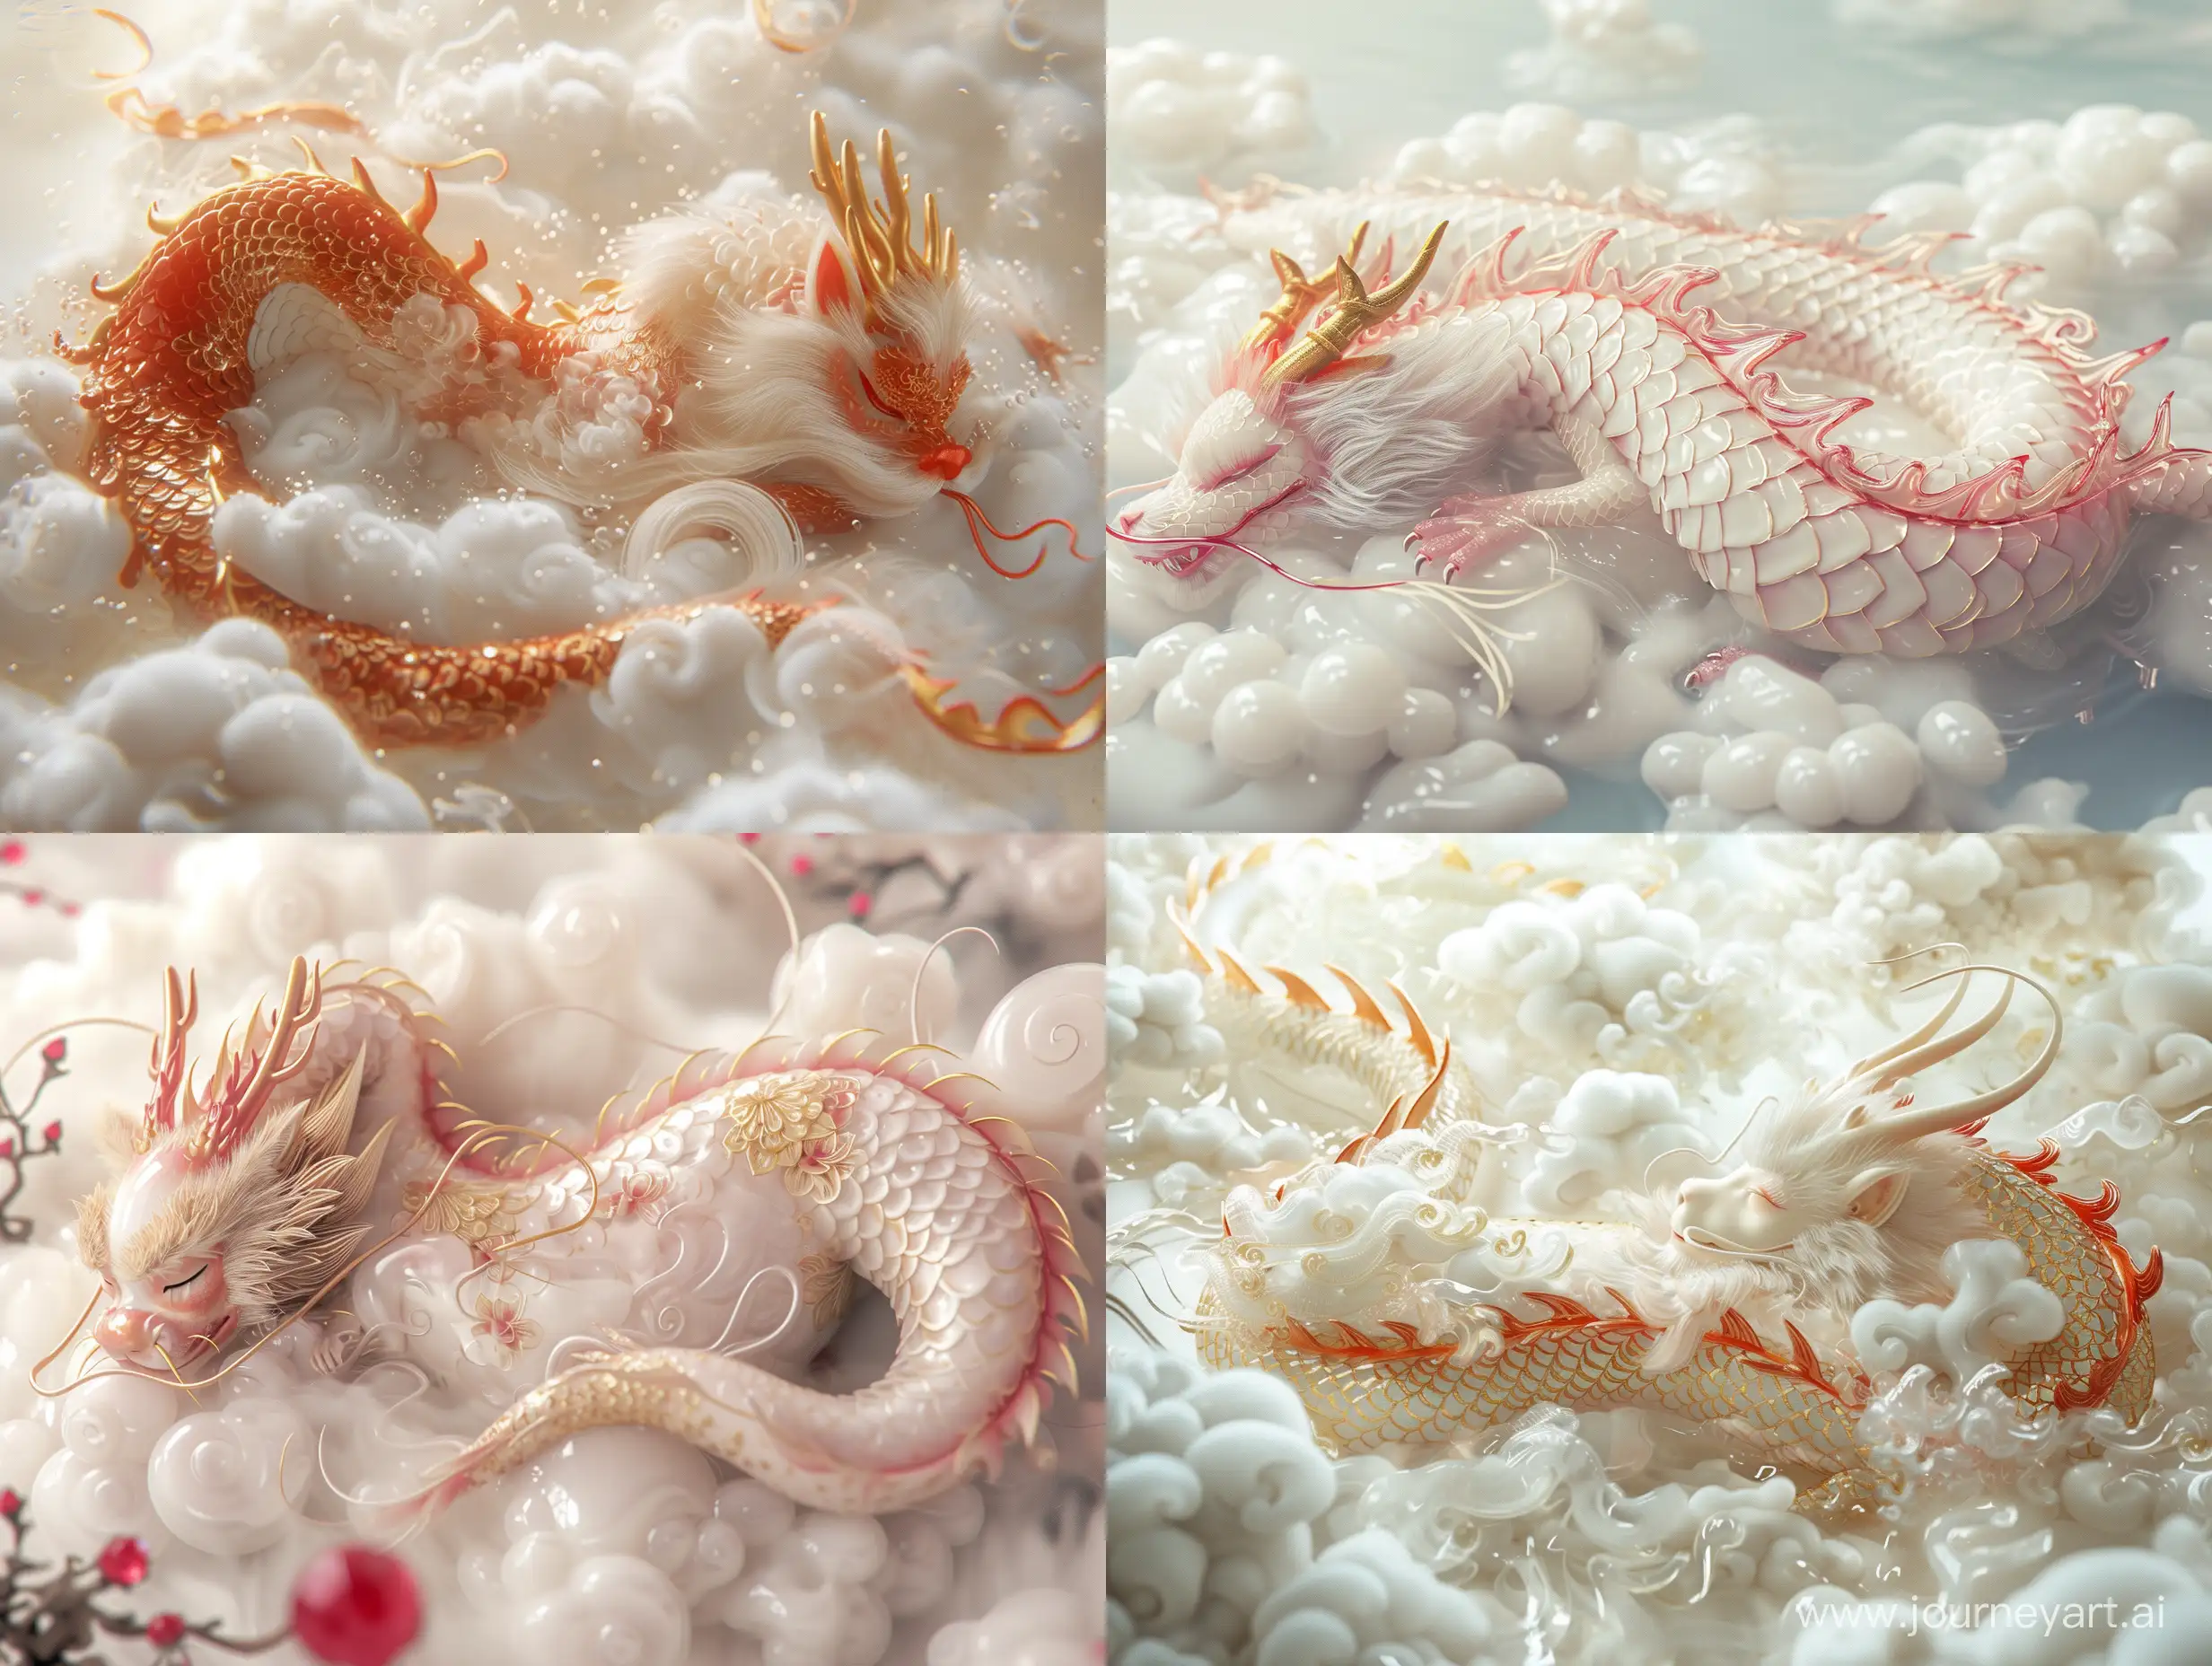 Translucent-Chinese-Dragon-Sleeping-on-Clouds-with-Ruby-and-Gold-Accents